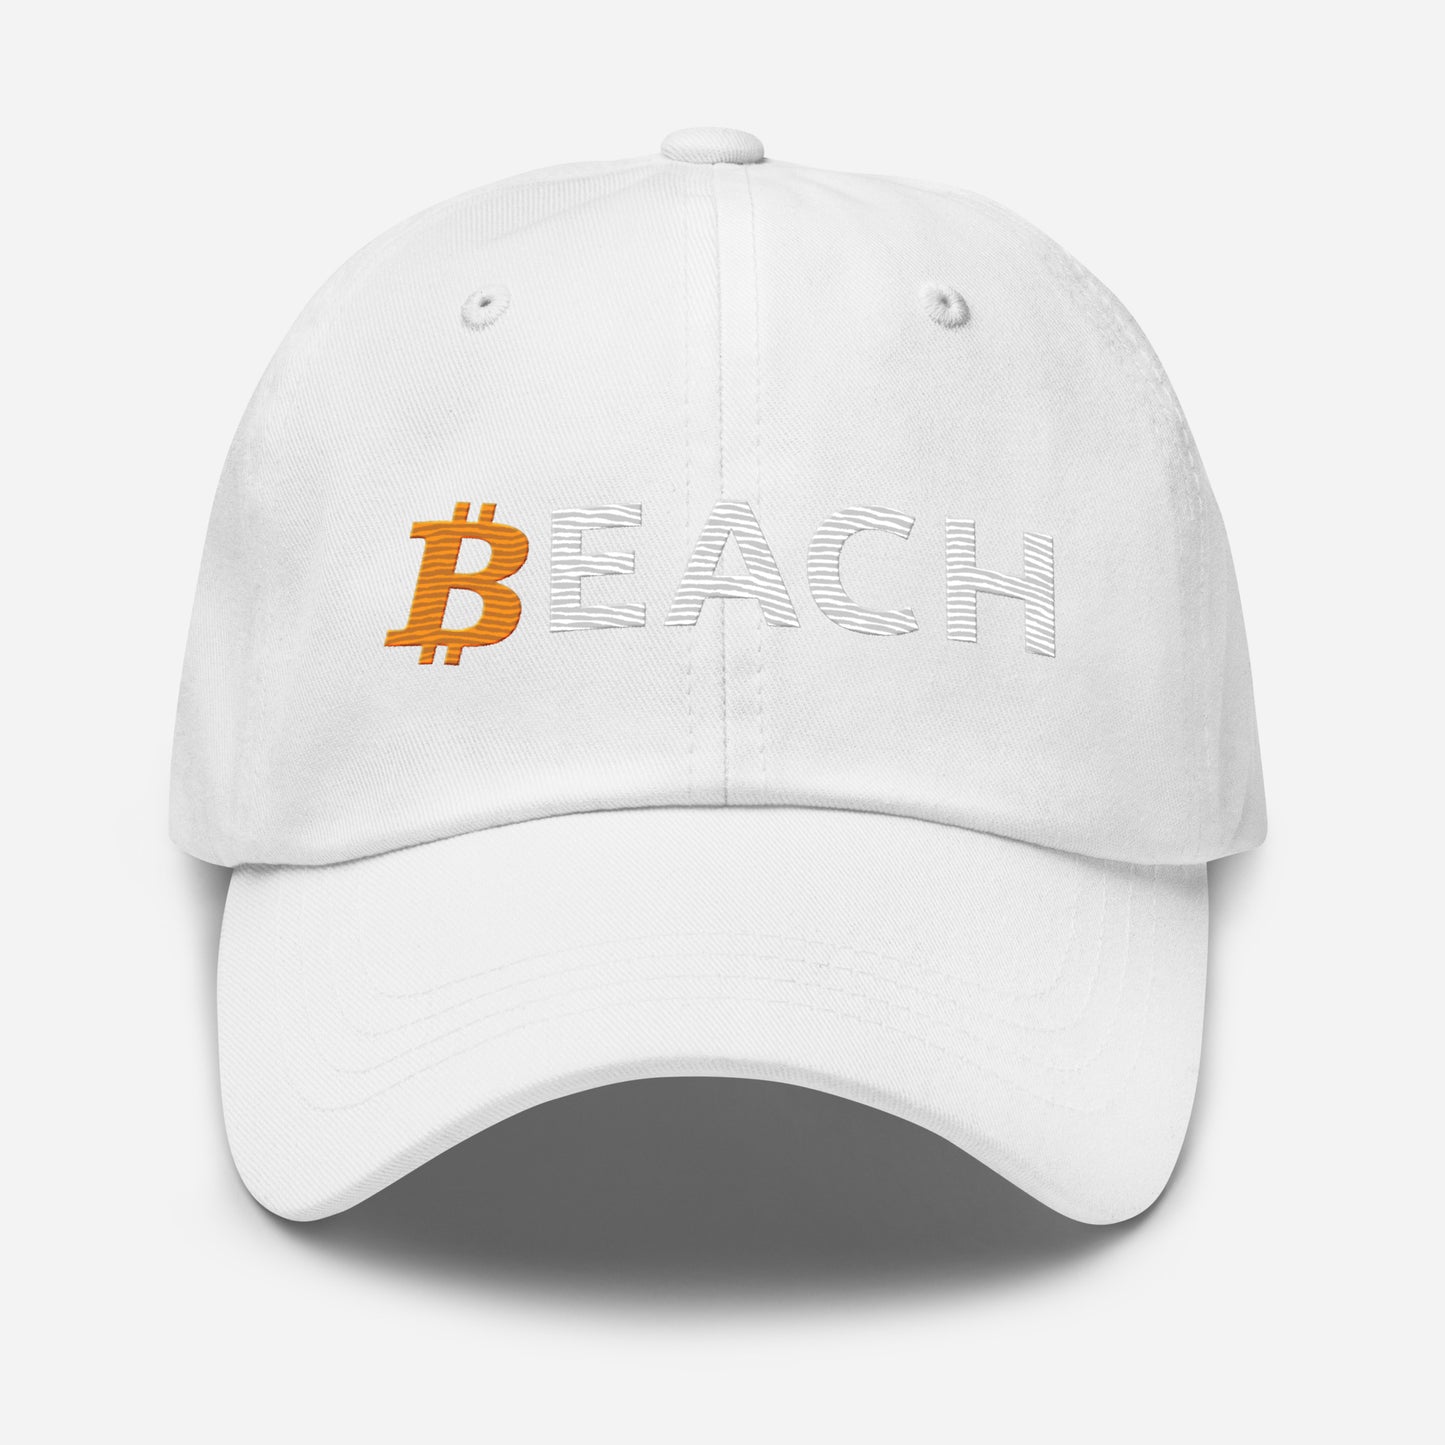 Bitcoin Beach Hat - The Halving Party Line